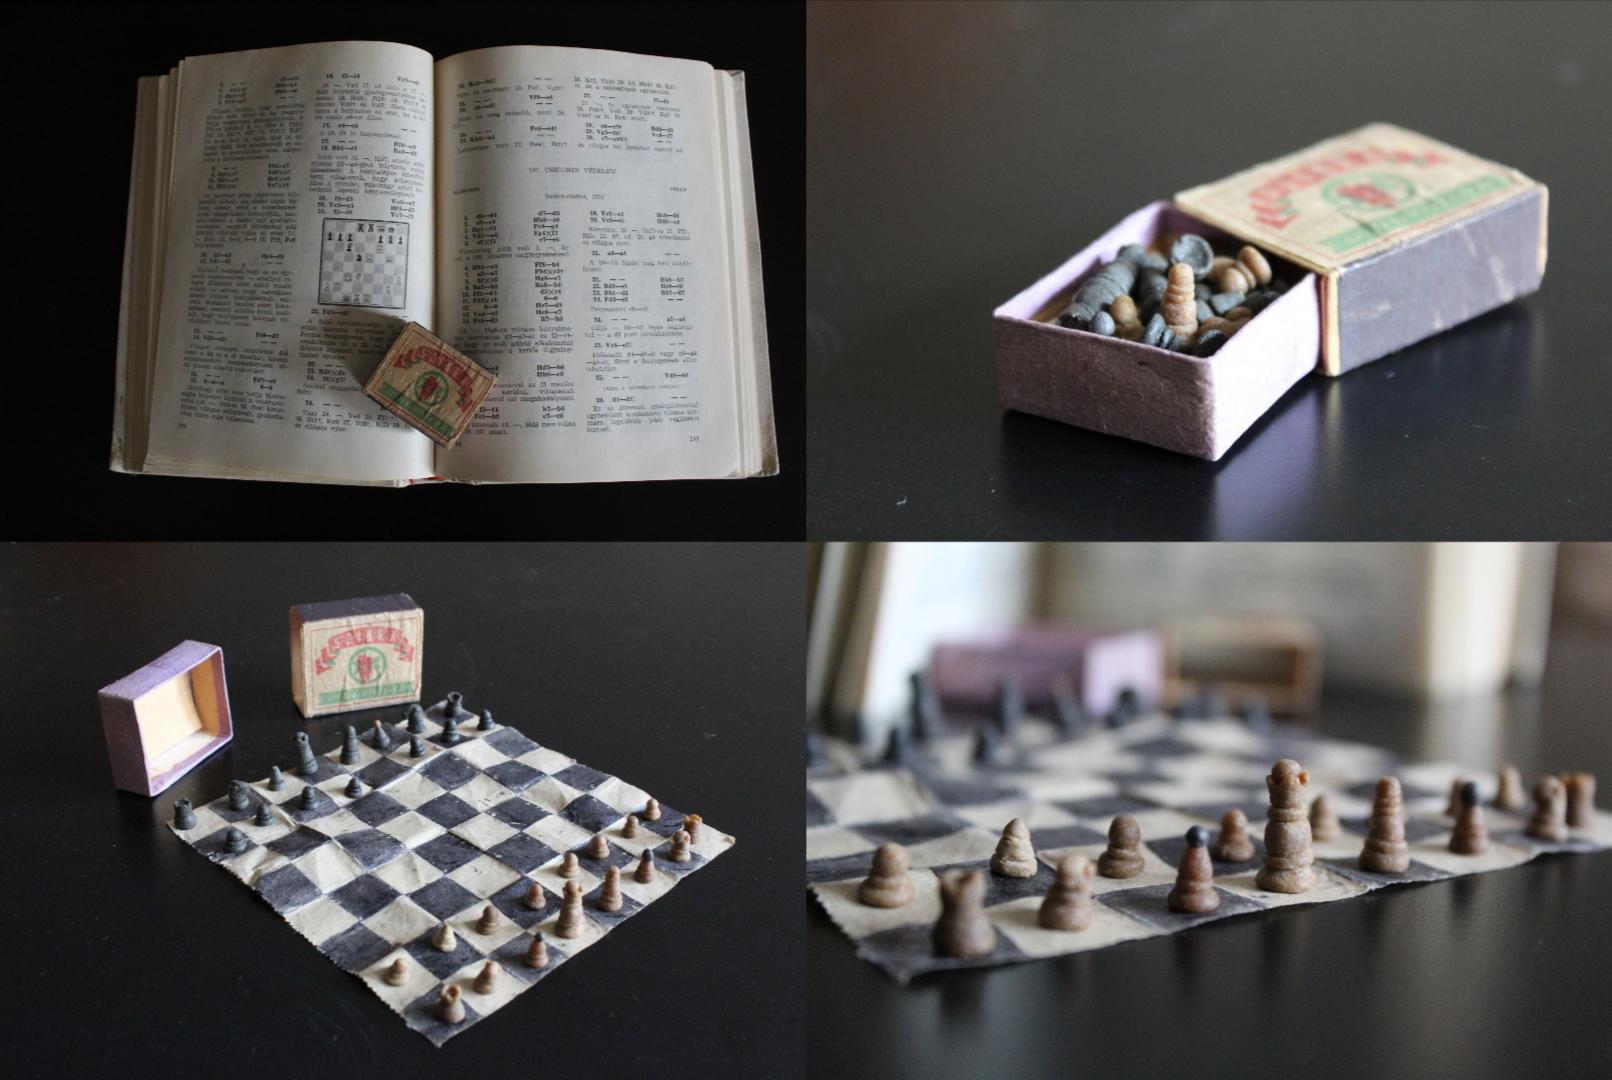 1950s+prison+chess+set+%26%238211%3B+made+out+of+toilet+paper%2C+dried+bread+and+shoe+polish.